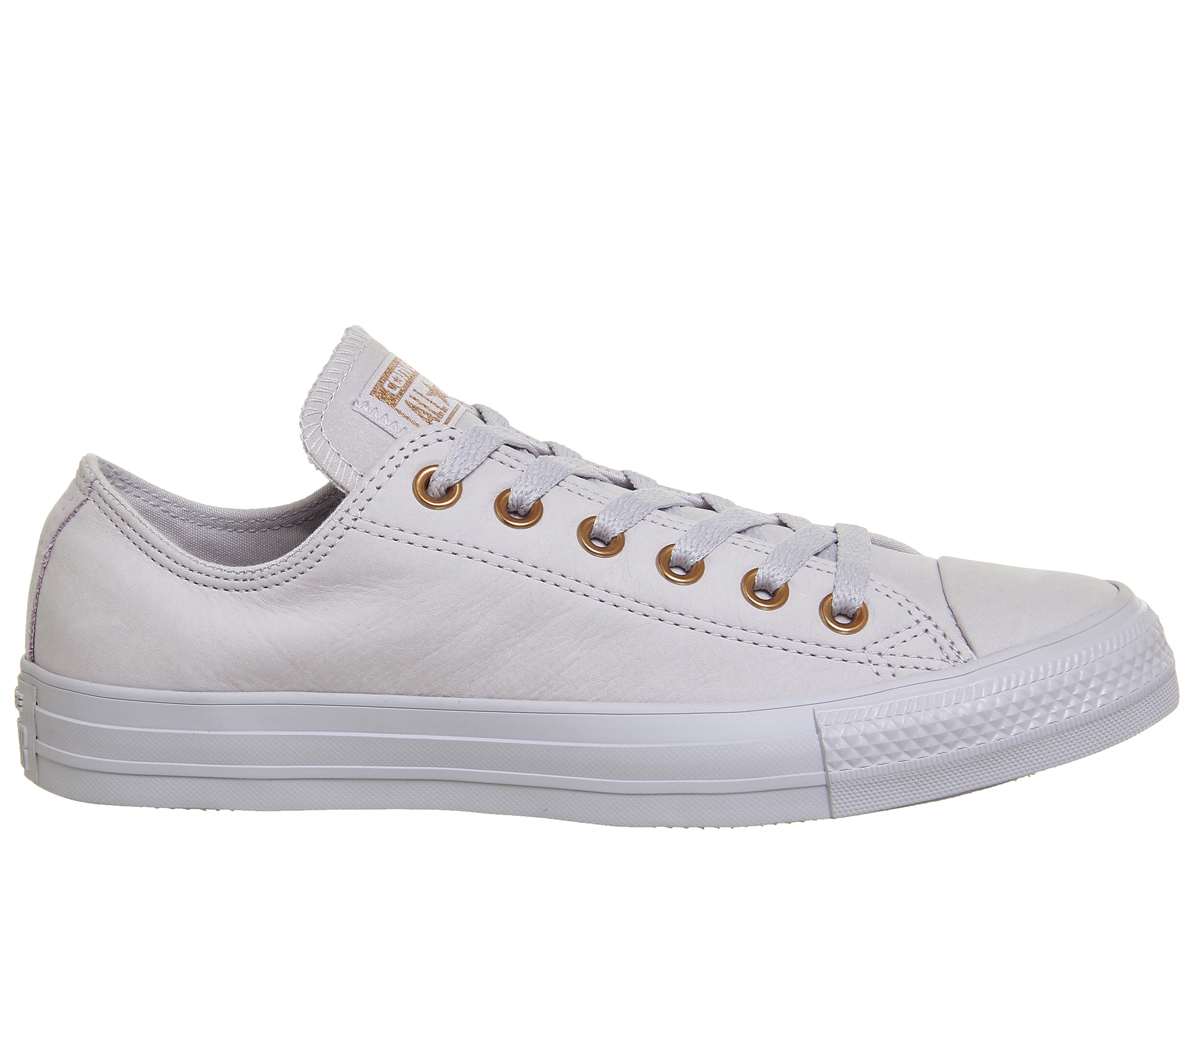 converse white leather rose gold eyelets